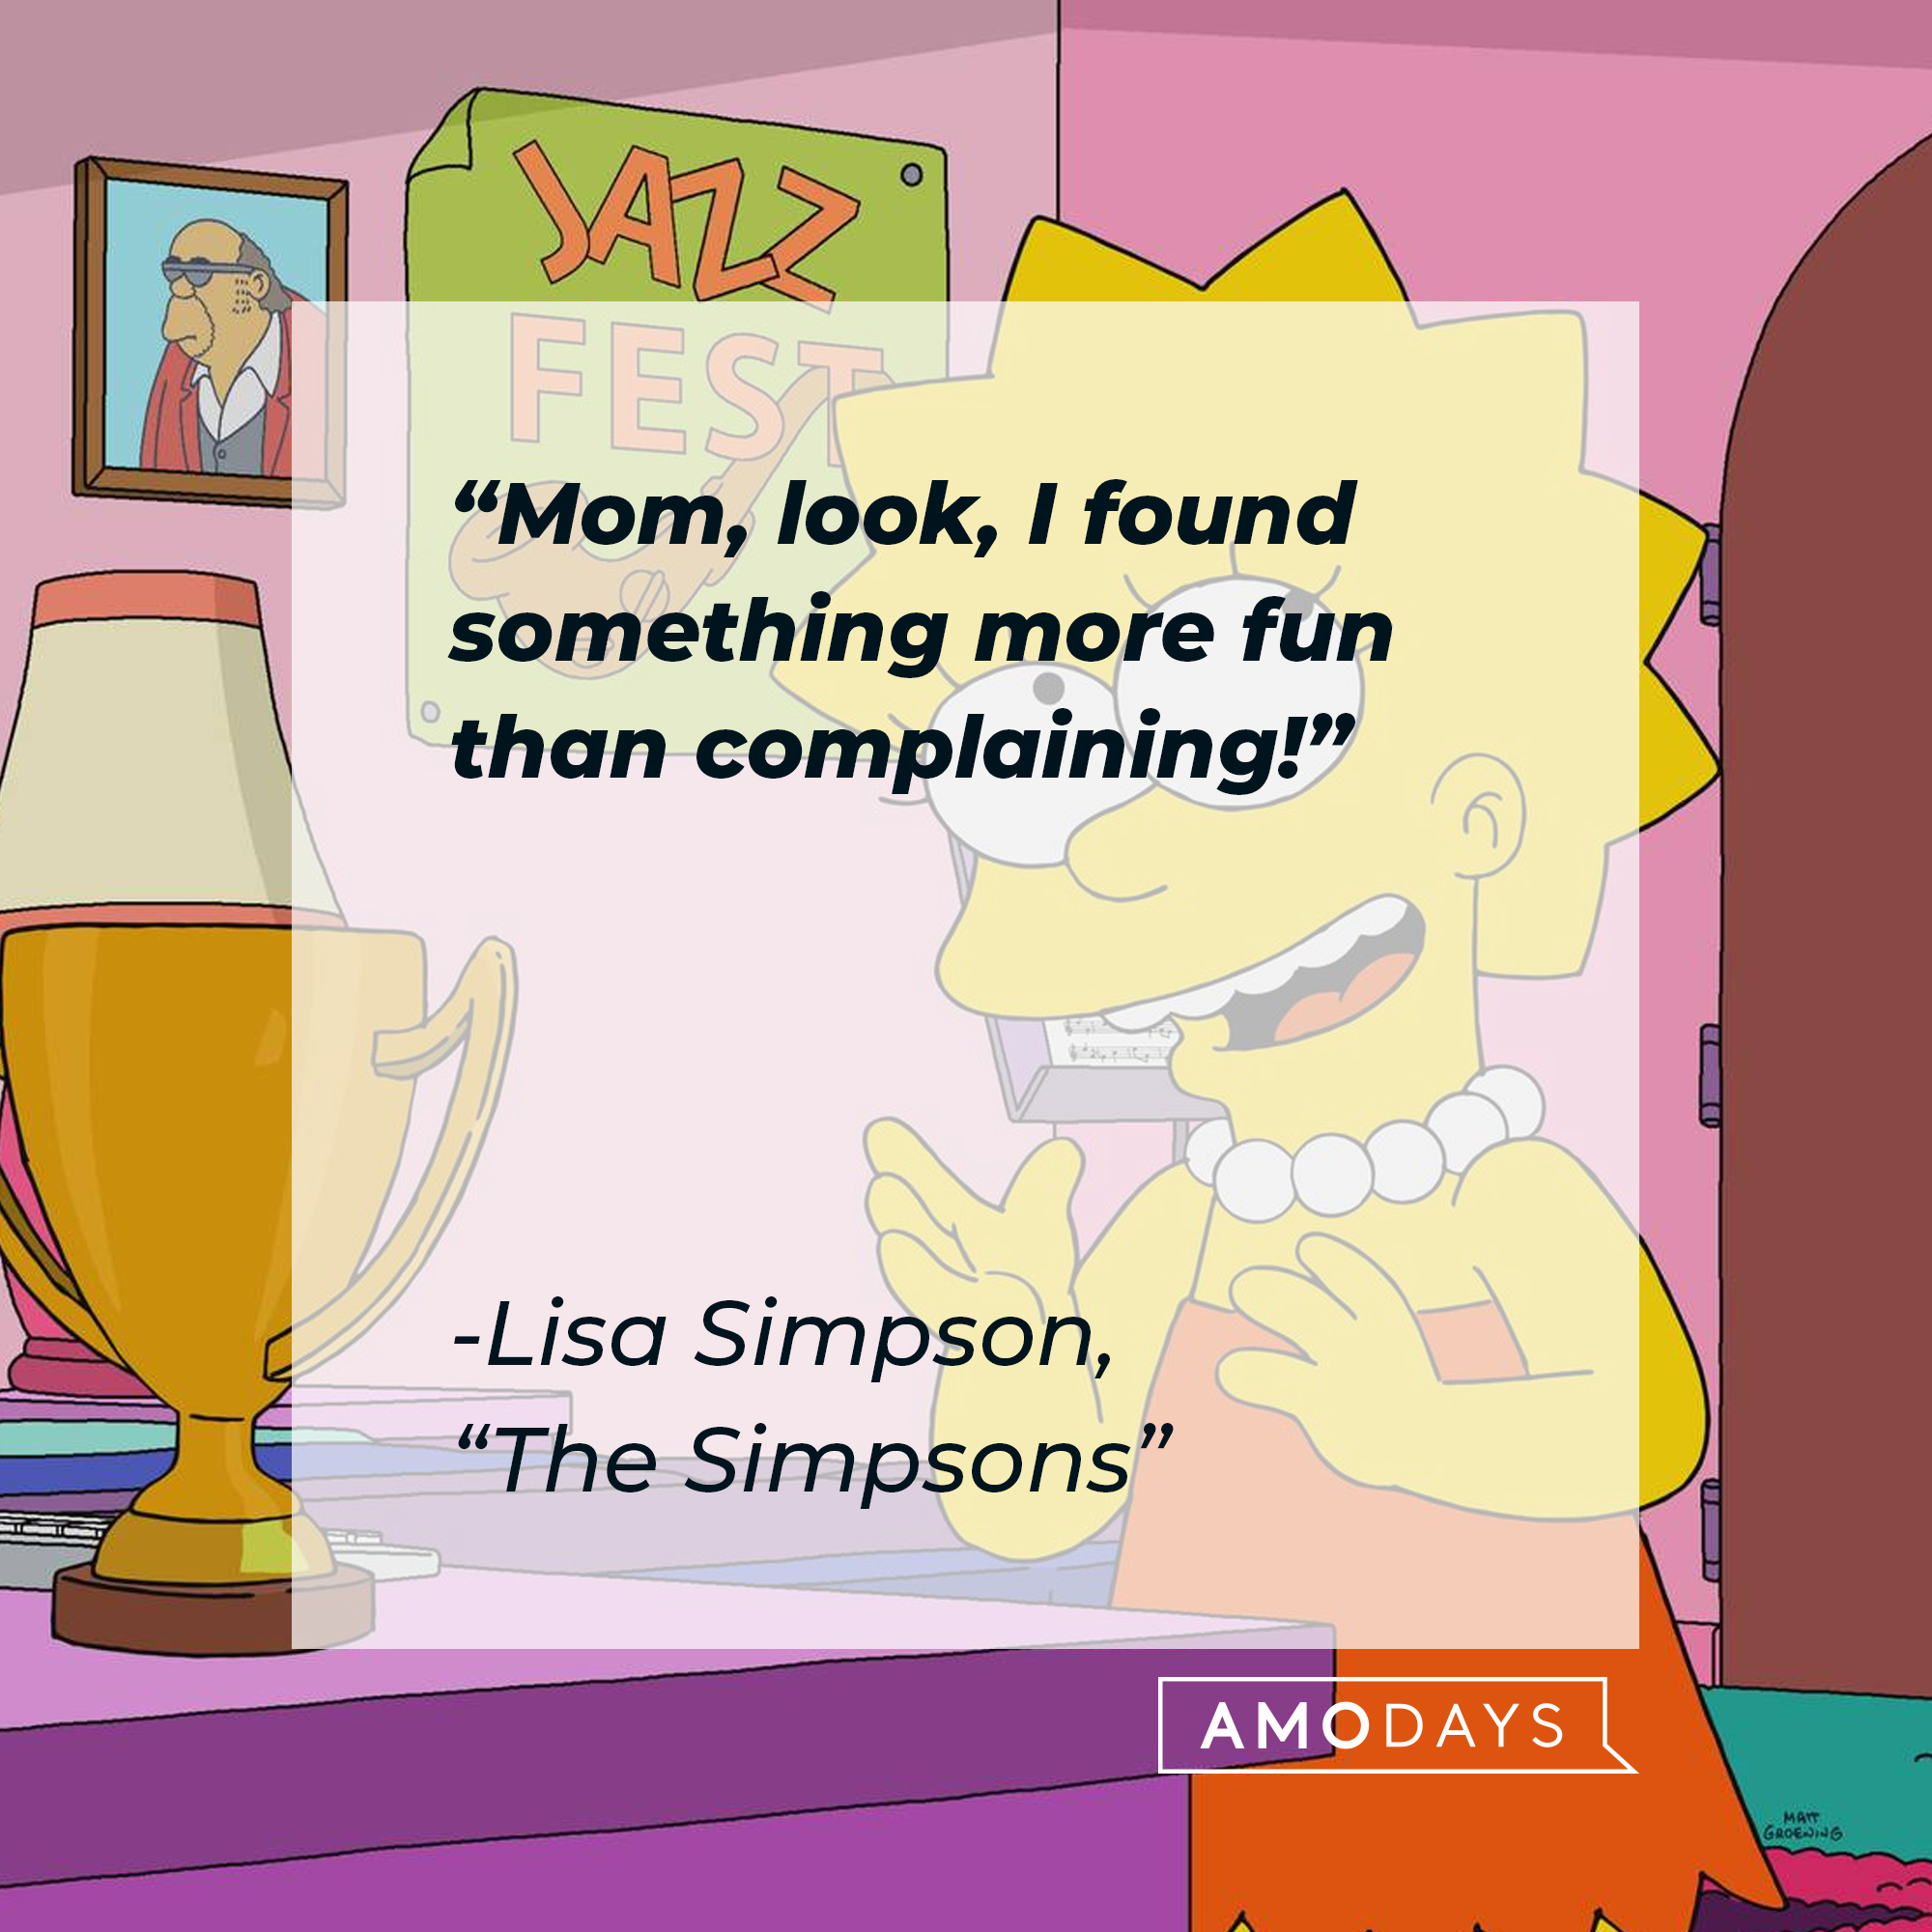 Lisa Simpson with her quote: “Mom, look, I found something more fun than complaining!” | Source: Facebook.com/TheSimpsons